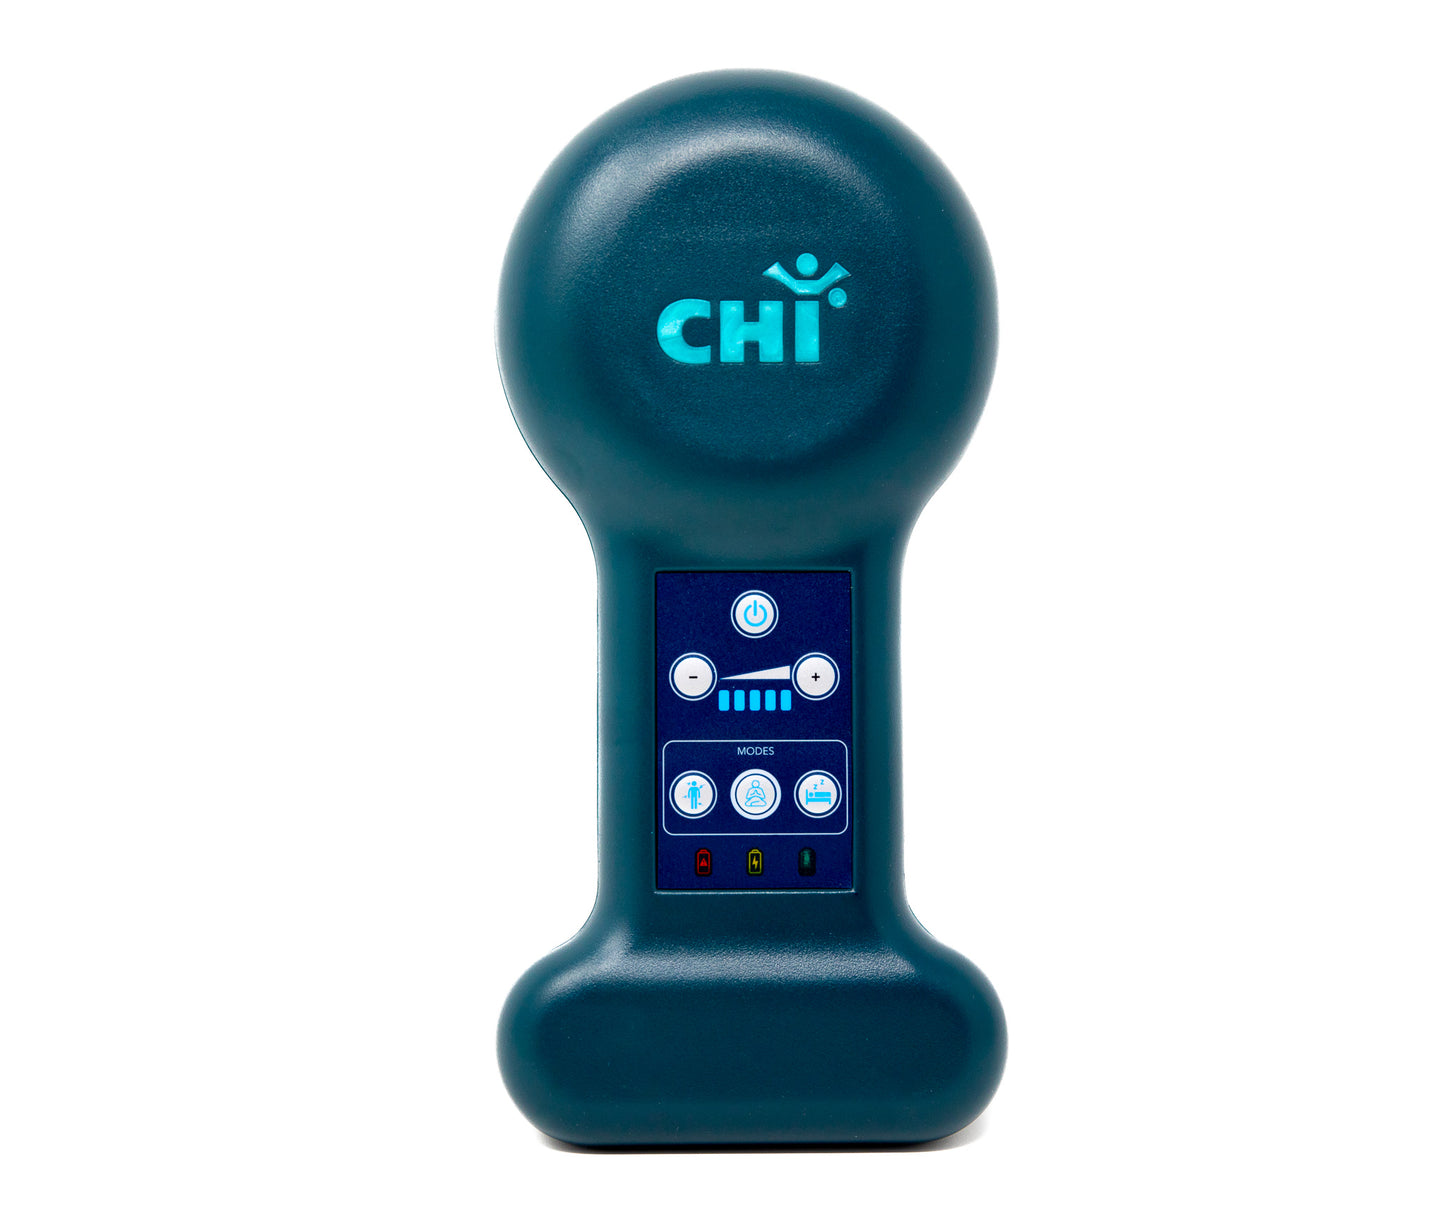 Cchm 5 in 1 Full Relax Tone Spin Body Massager Electric Full Body Slimming Massager,Blue